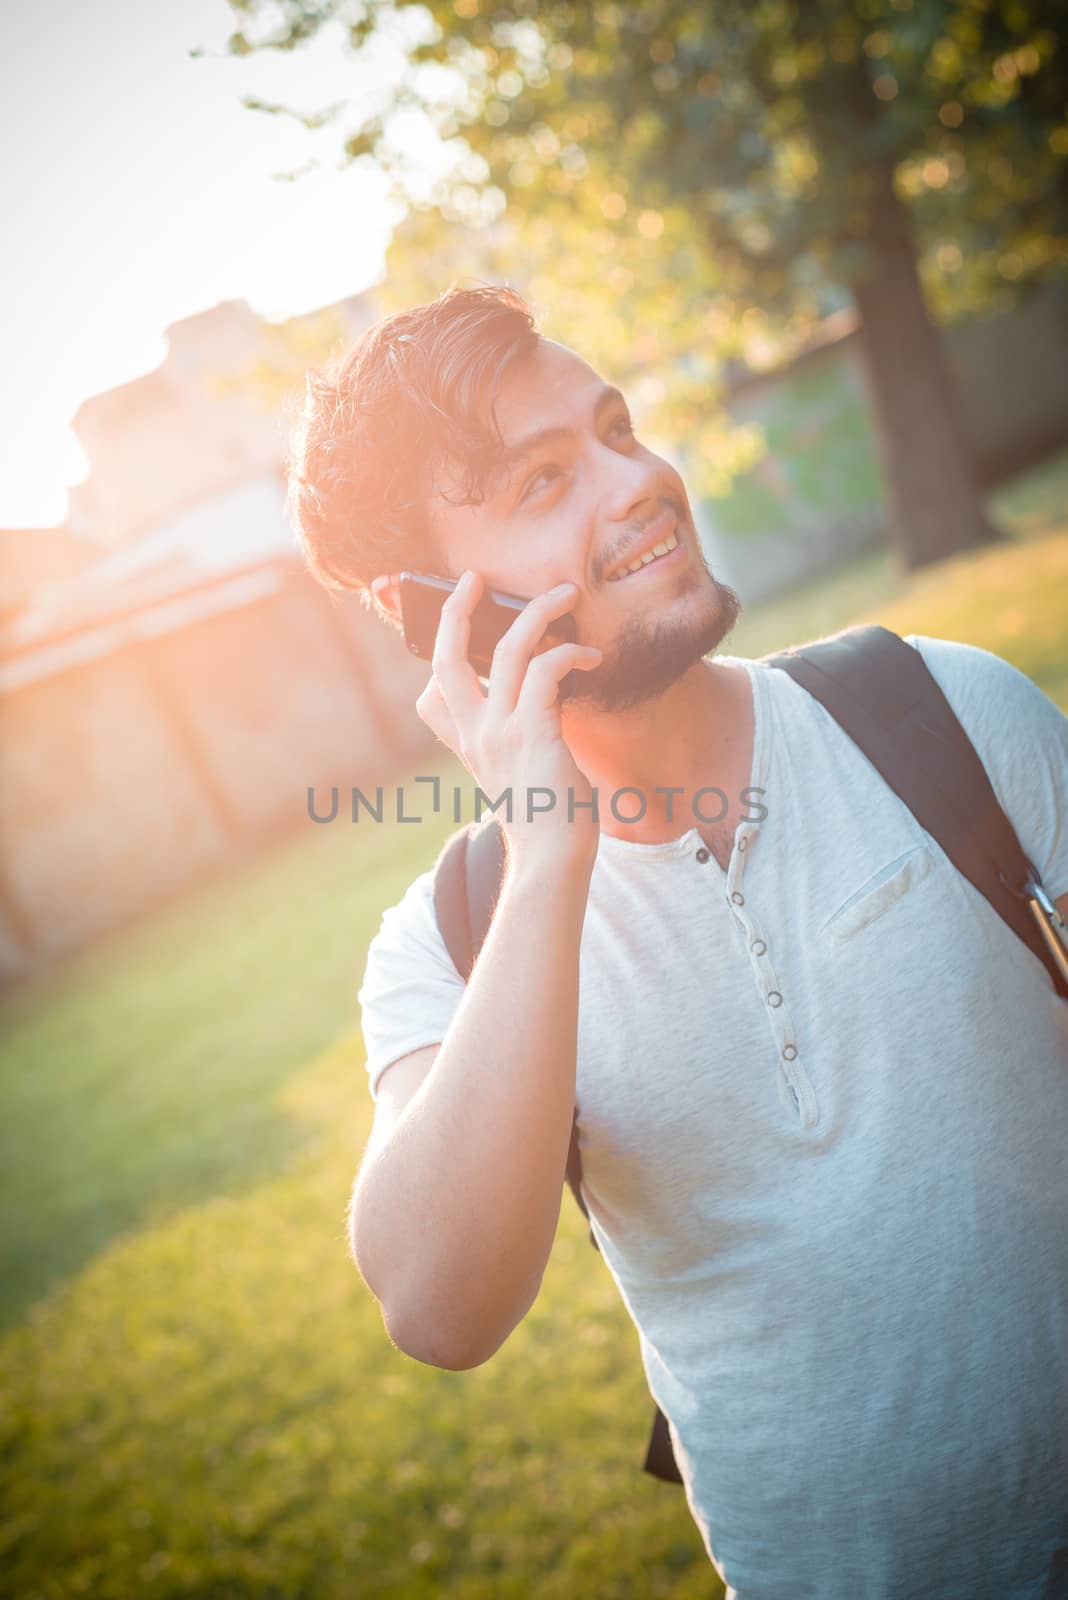 stylish man on the phone at the park